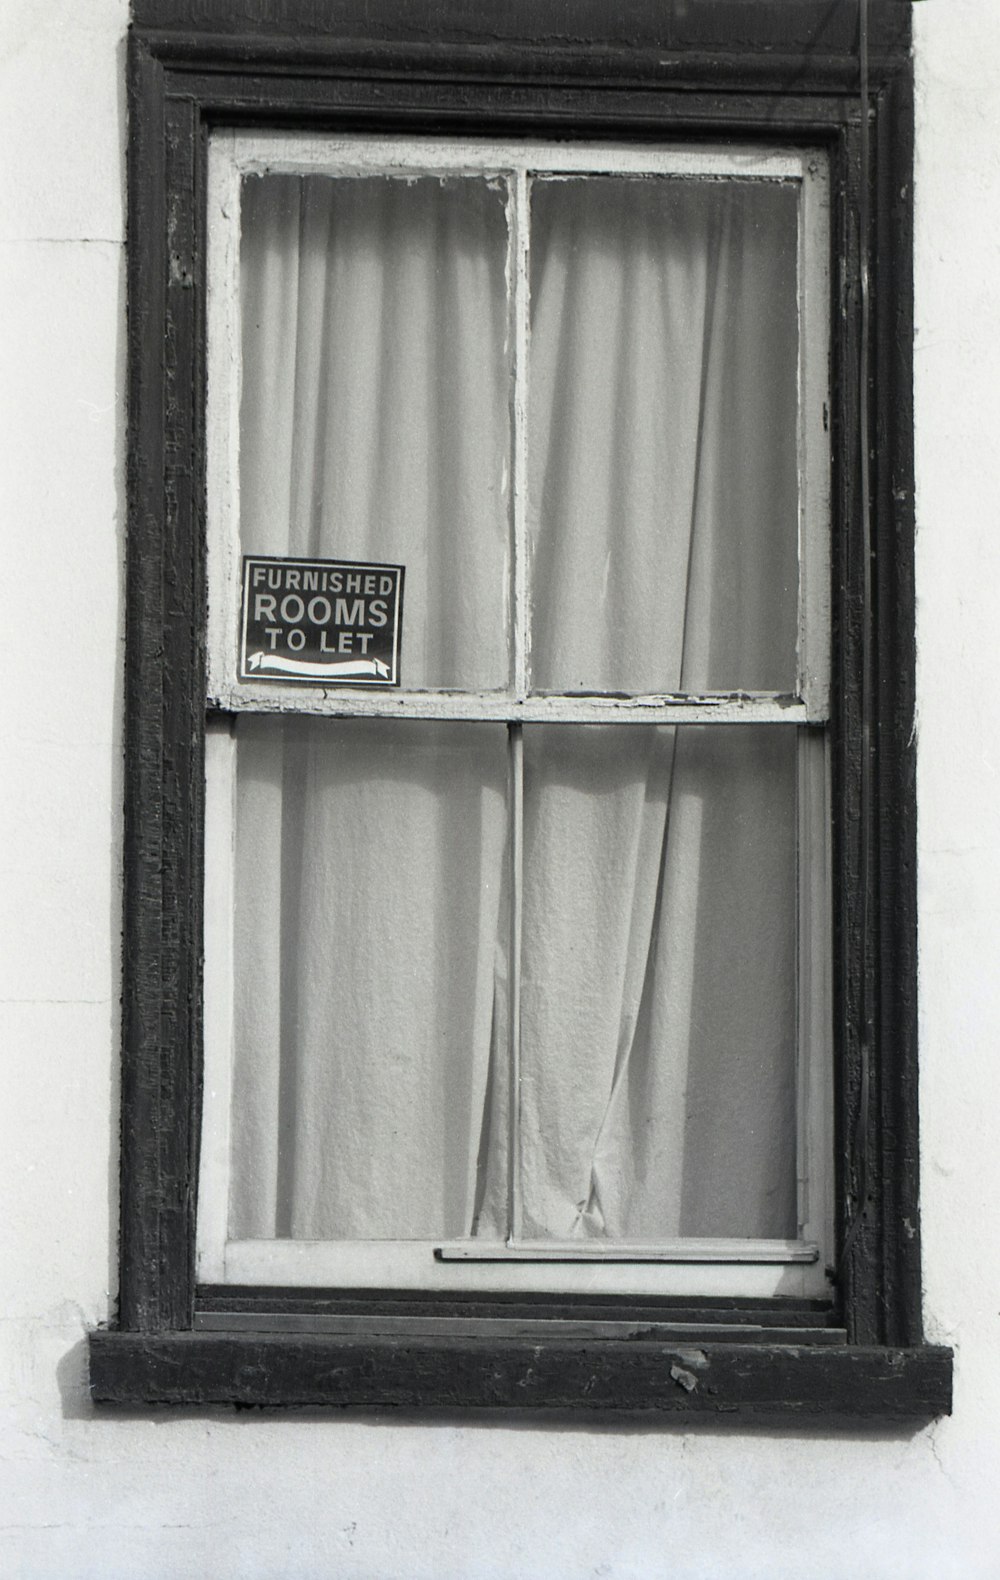 a black and white photo of a window with a sign on it